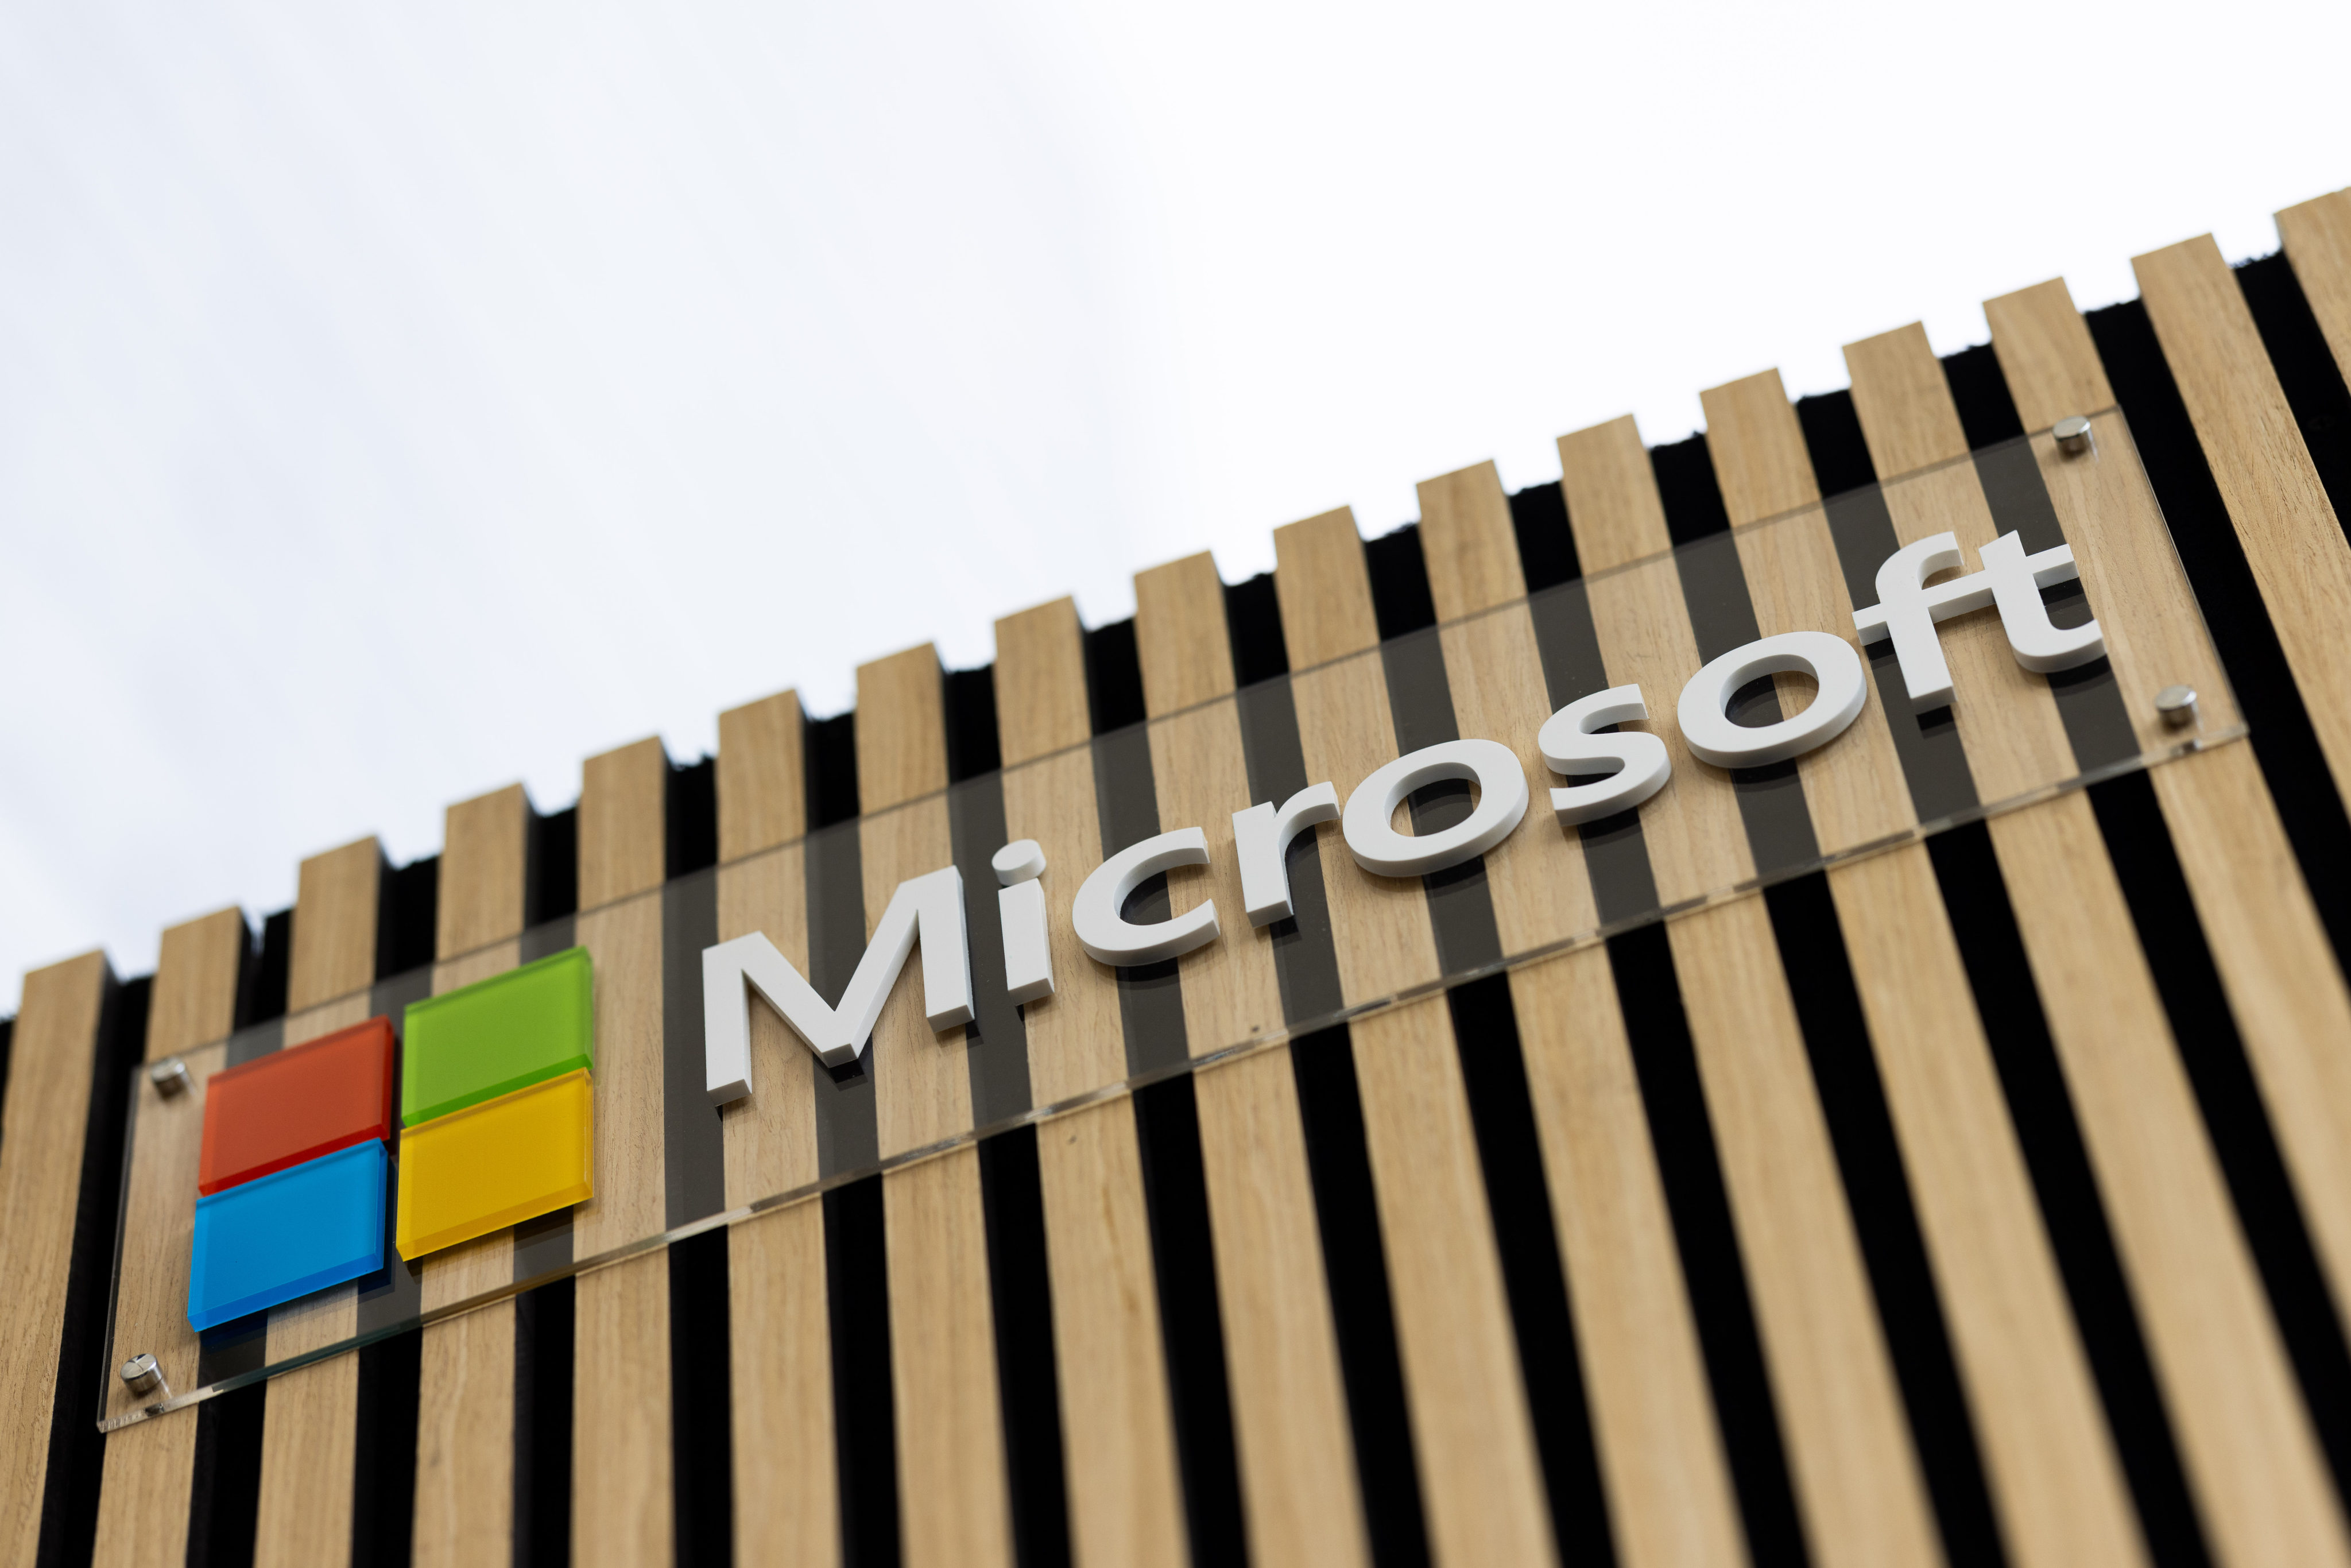 Microsoft says it will appeal the US Internal Revenue Service’s decision that the company owes taxes from 2004 to 2013. Photo: dpa